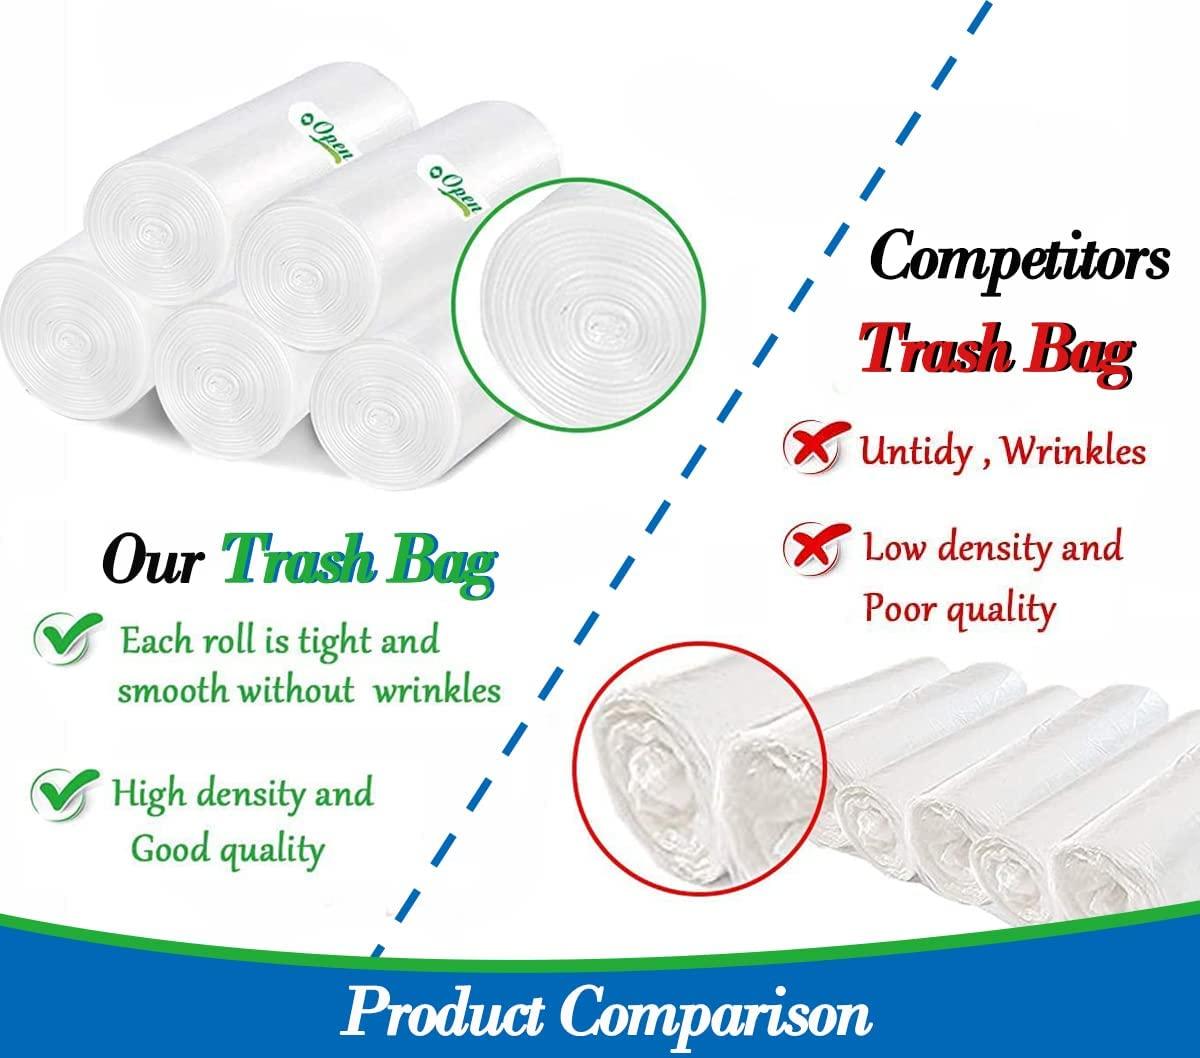 1.2 gallon trash can liners,Small clear Garbage Bags 300,Extra Strong 1 2  Gal Trash Bag,Fit 4.5-6 liters trash Bin Liners for Home Office Kitchen  1.2Gallon Clear